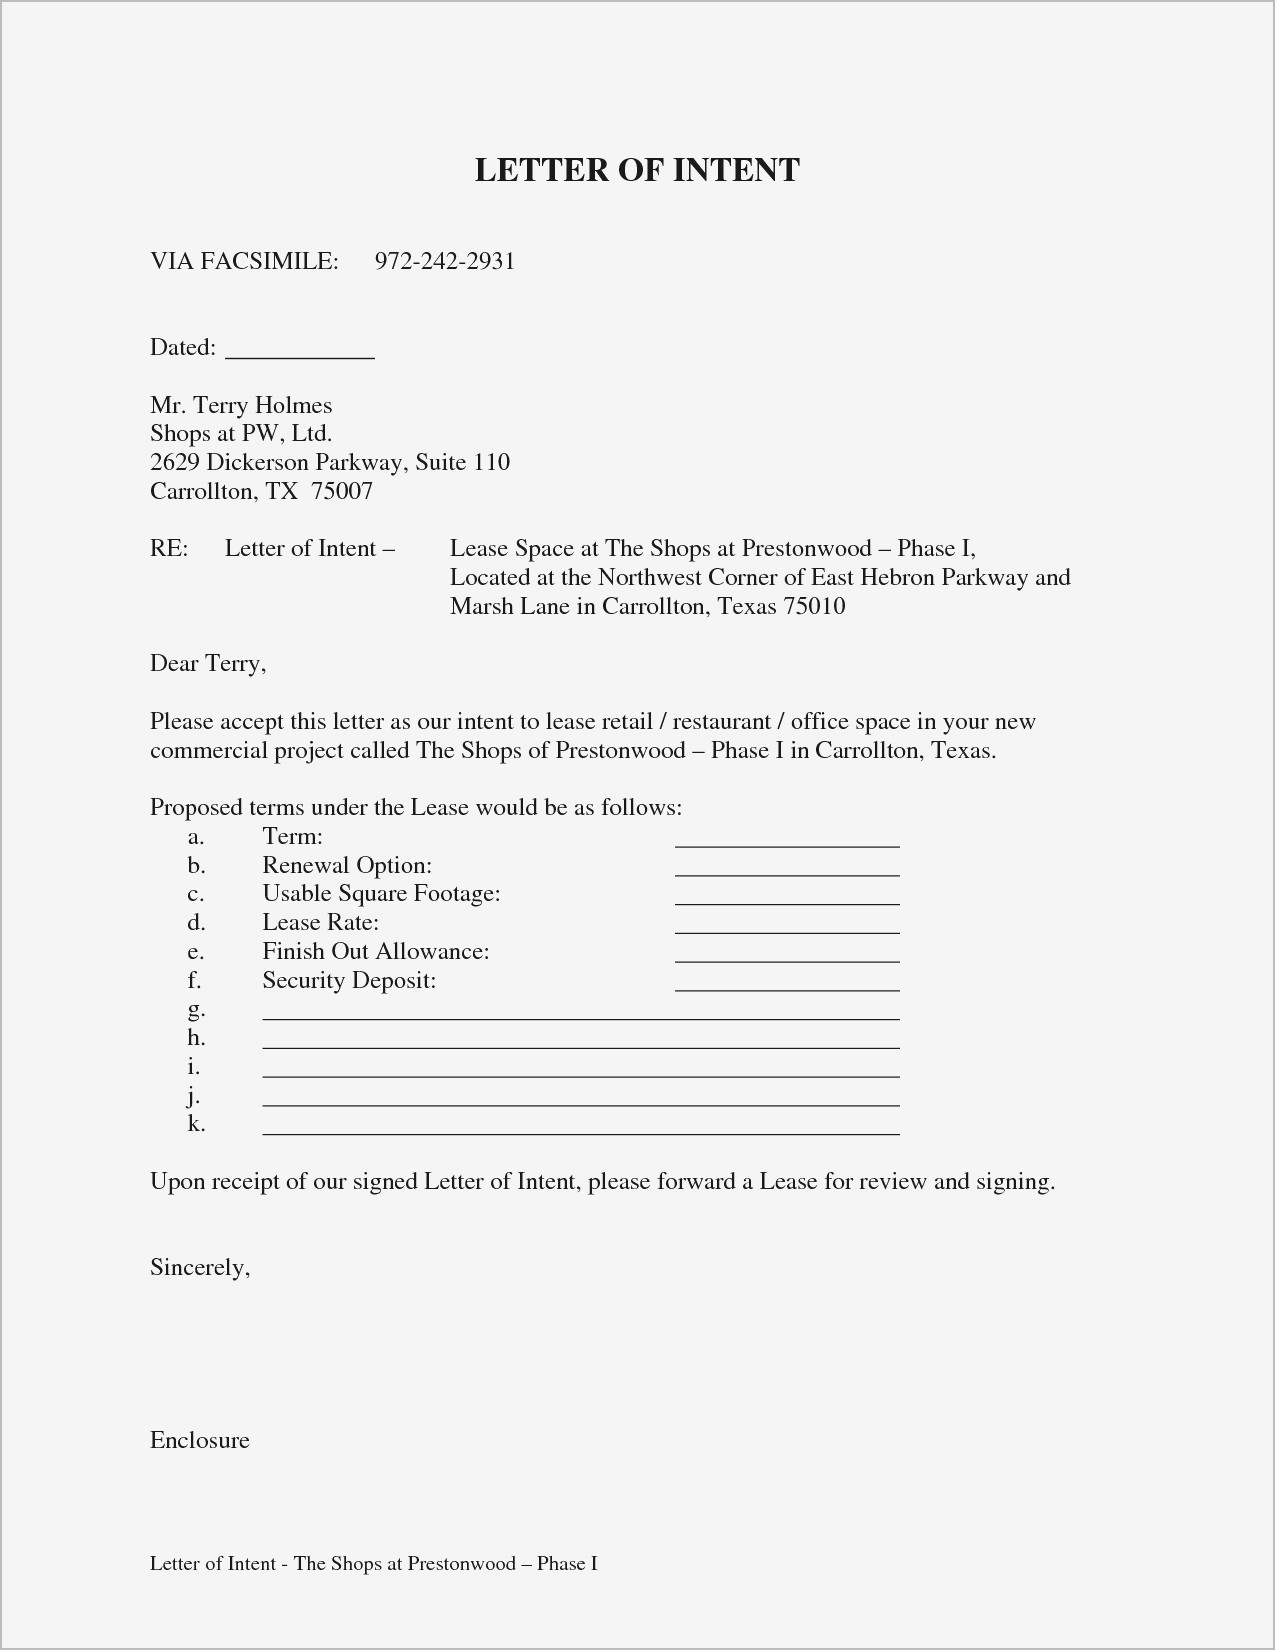 Letter Of Intent To Lease Template Collection - Letter Template Collection